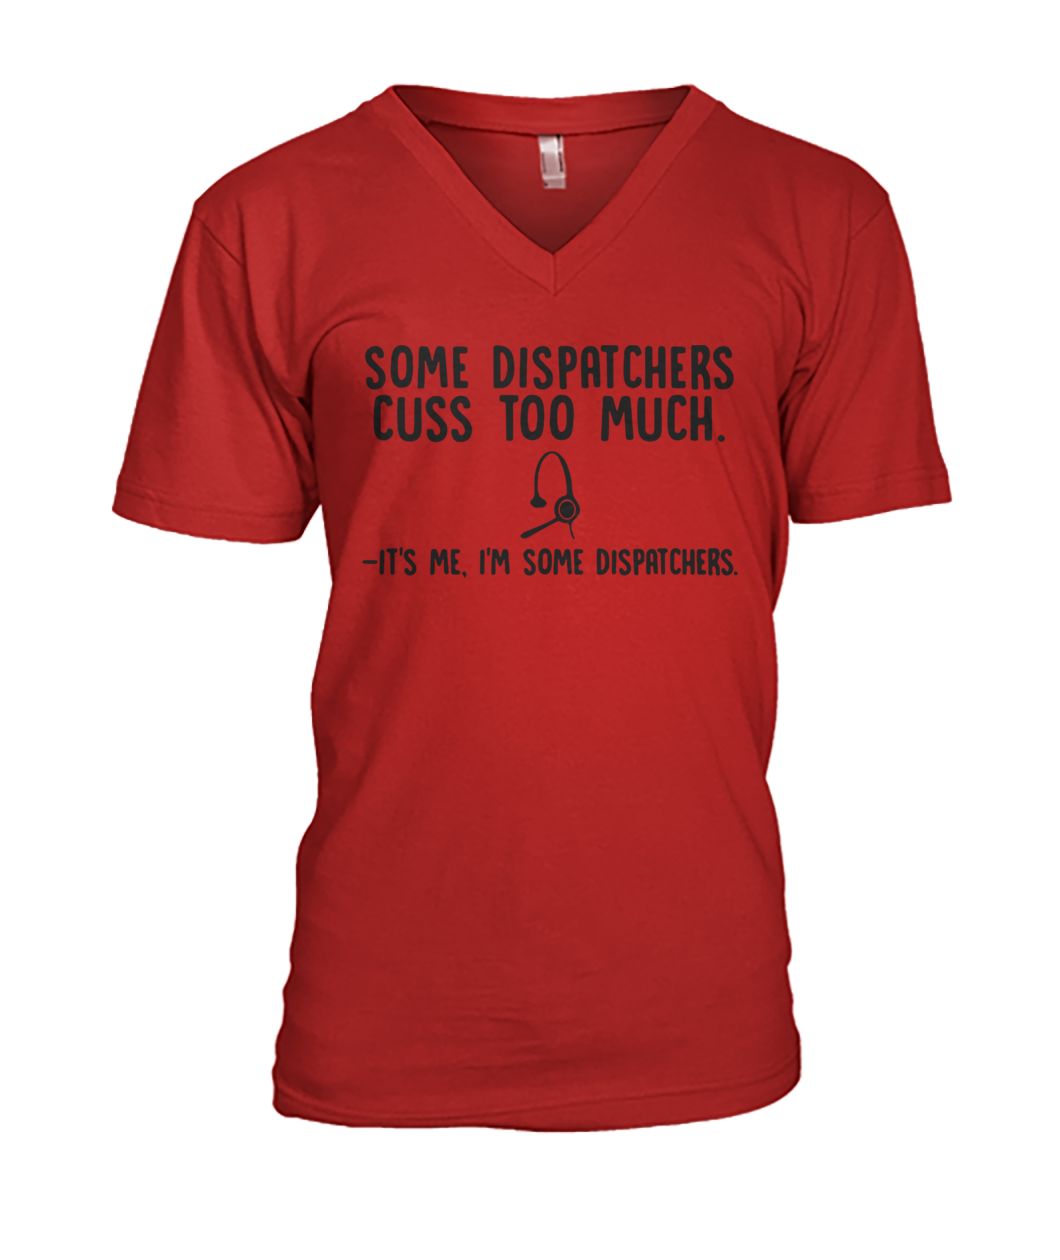 Some dispatchers cuss too much it's me I'm some dispatchers mens v-neck